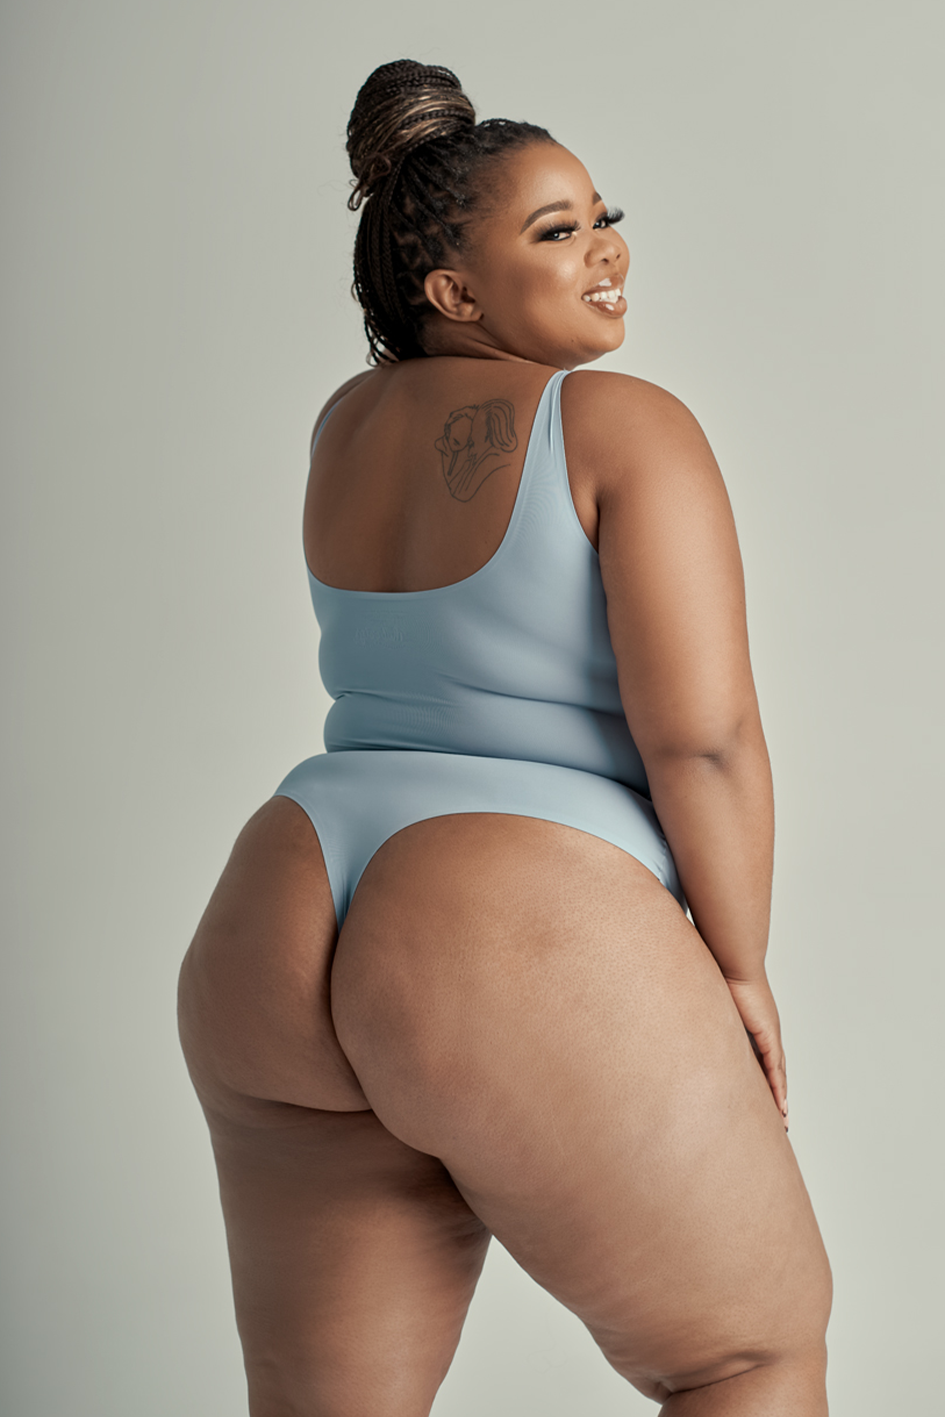 Sihle Ndaba Naked Pic - The Naked Collection â€“ Thabootys Underwear & Shapewear